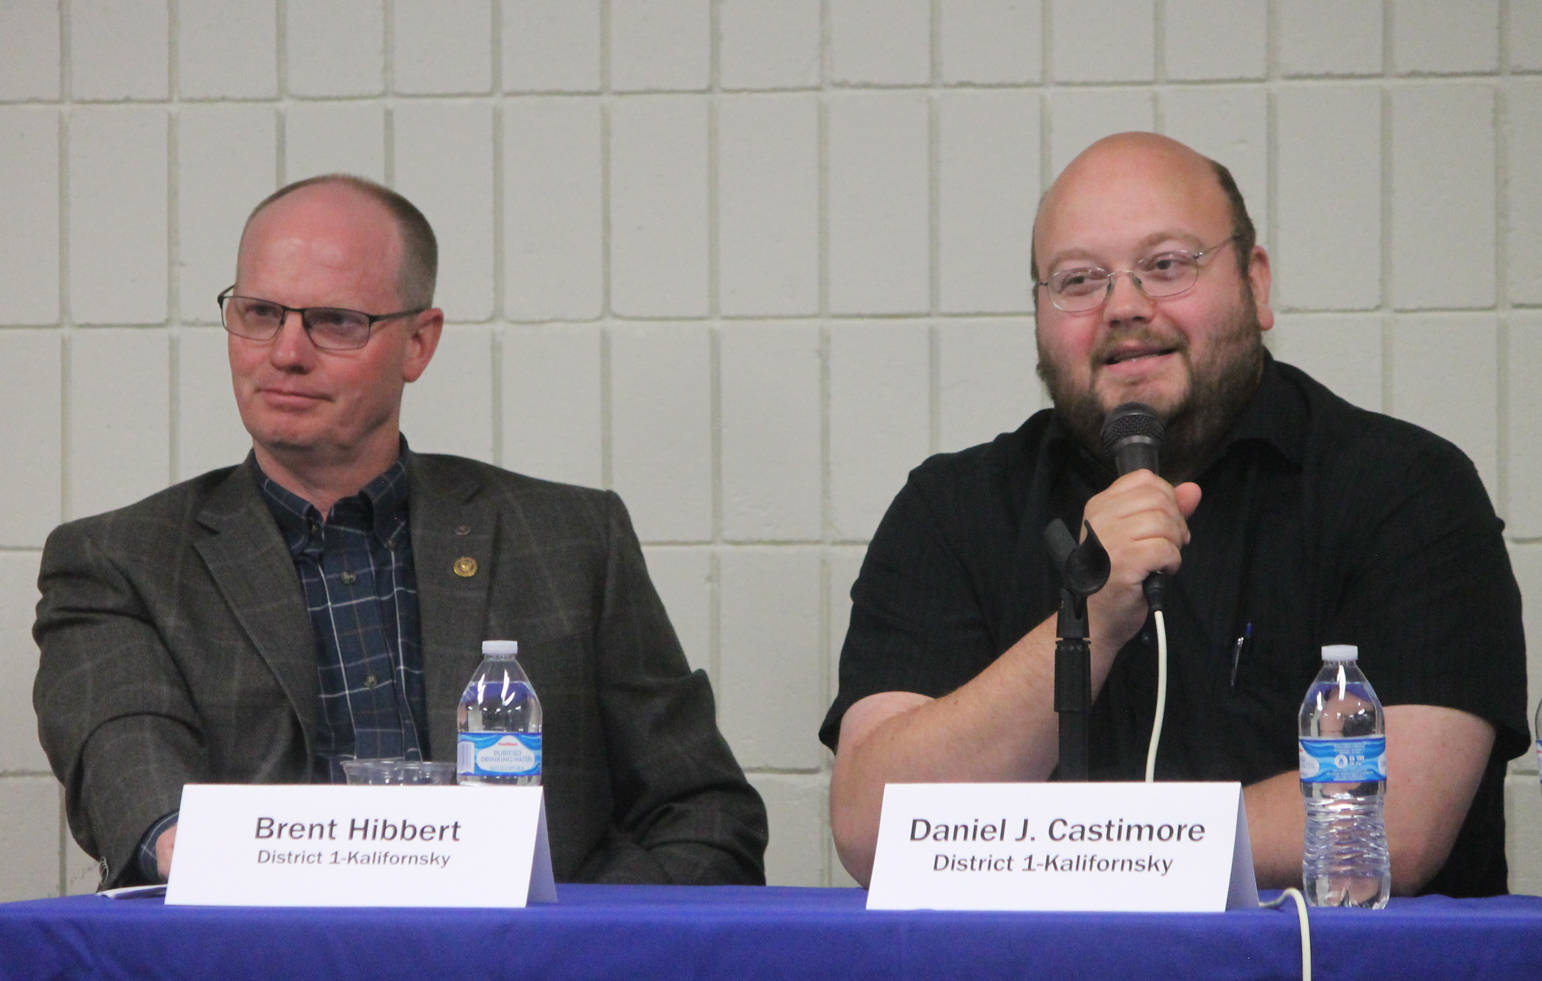 Brent Hibbert, left, listens while Dan Castimore answers a question during a forum for Kenai Peninsula Borough Assembly candidates Wednesday at a joint meeting of the Kenai and Soldotna Chambers of Commerce. Hibbert and Castimore are running for the District 1-Kalifornsky seat. (Photo by Will Morrow/Peninsula Clarion)